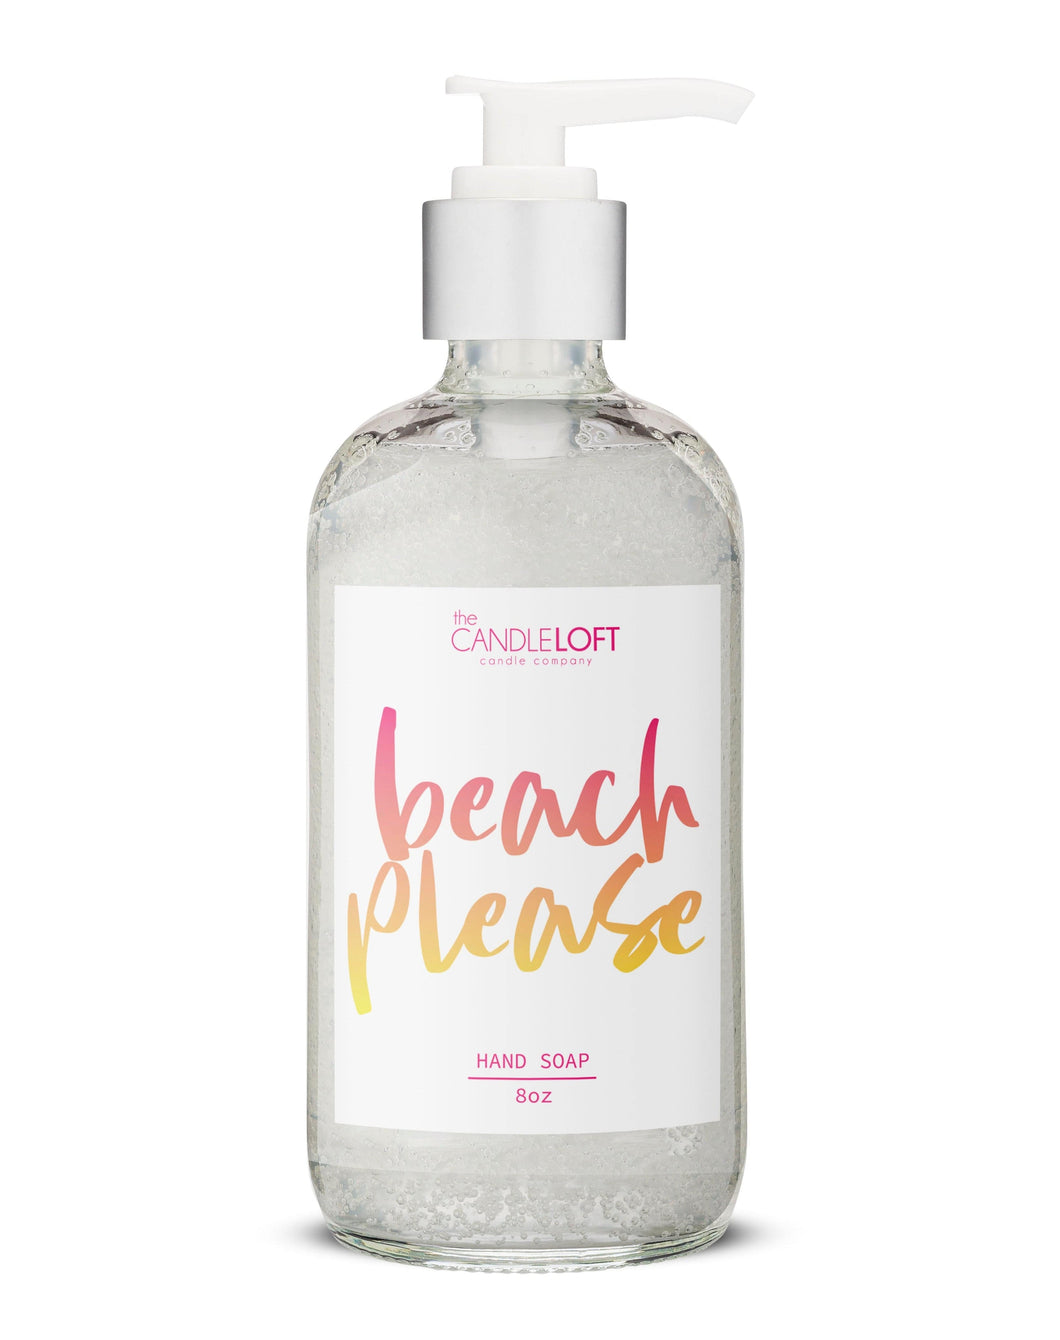 The Candle Loft Hand Soap Beach Please Hand Soap